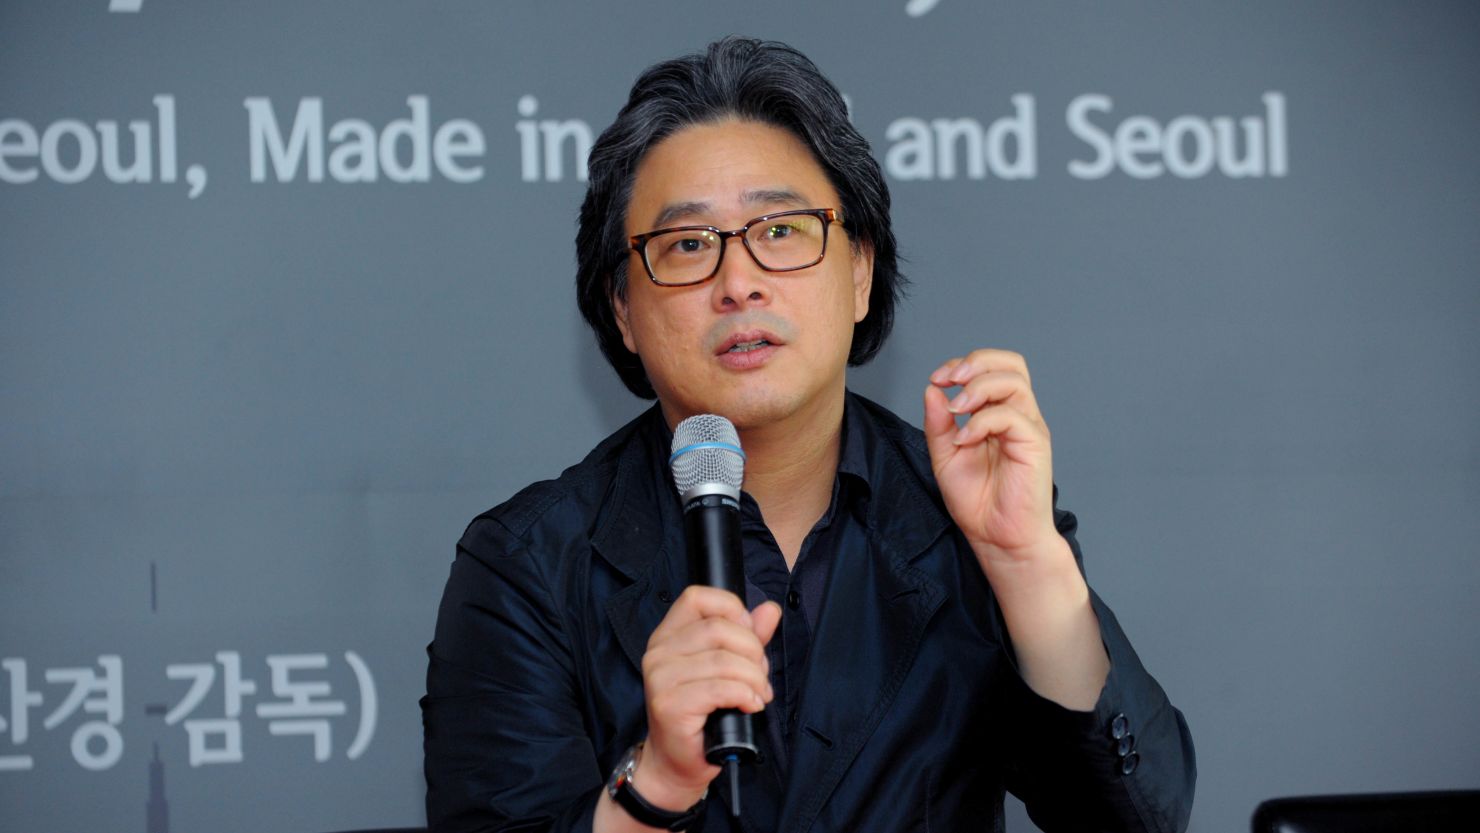 "The actual quality of the video submissions doesn't matter," said director Park Chan-wook at a press conference in Seoul last month, discussing his crowd-sourced "Seoul, Our Movie" project.